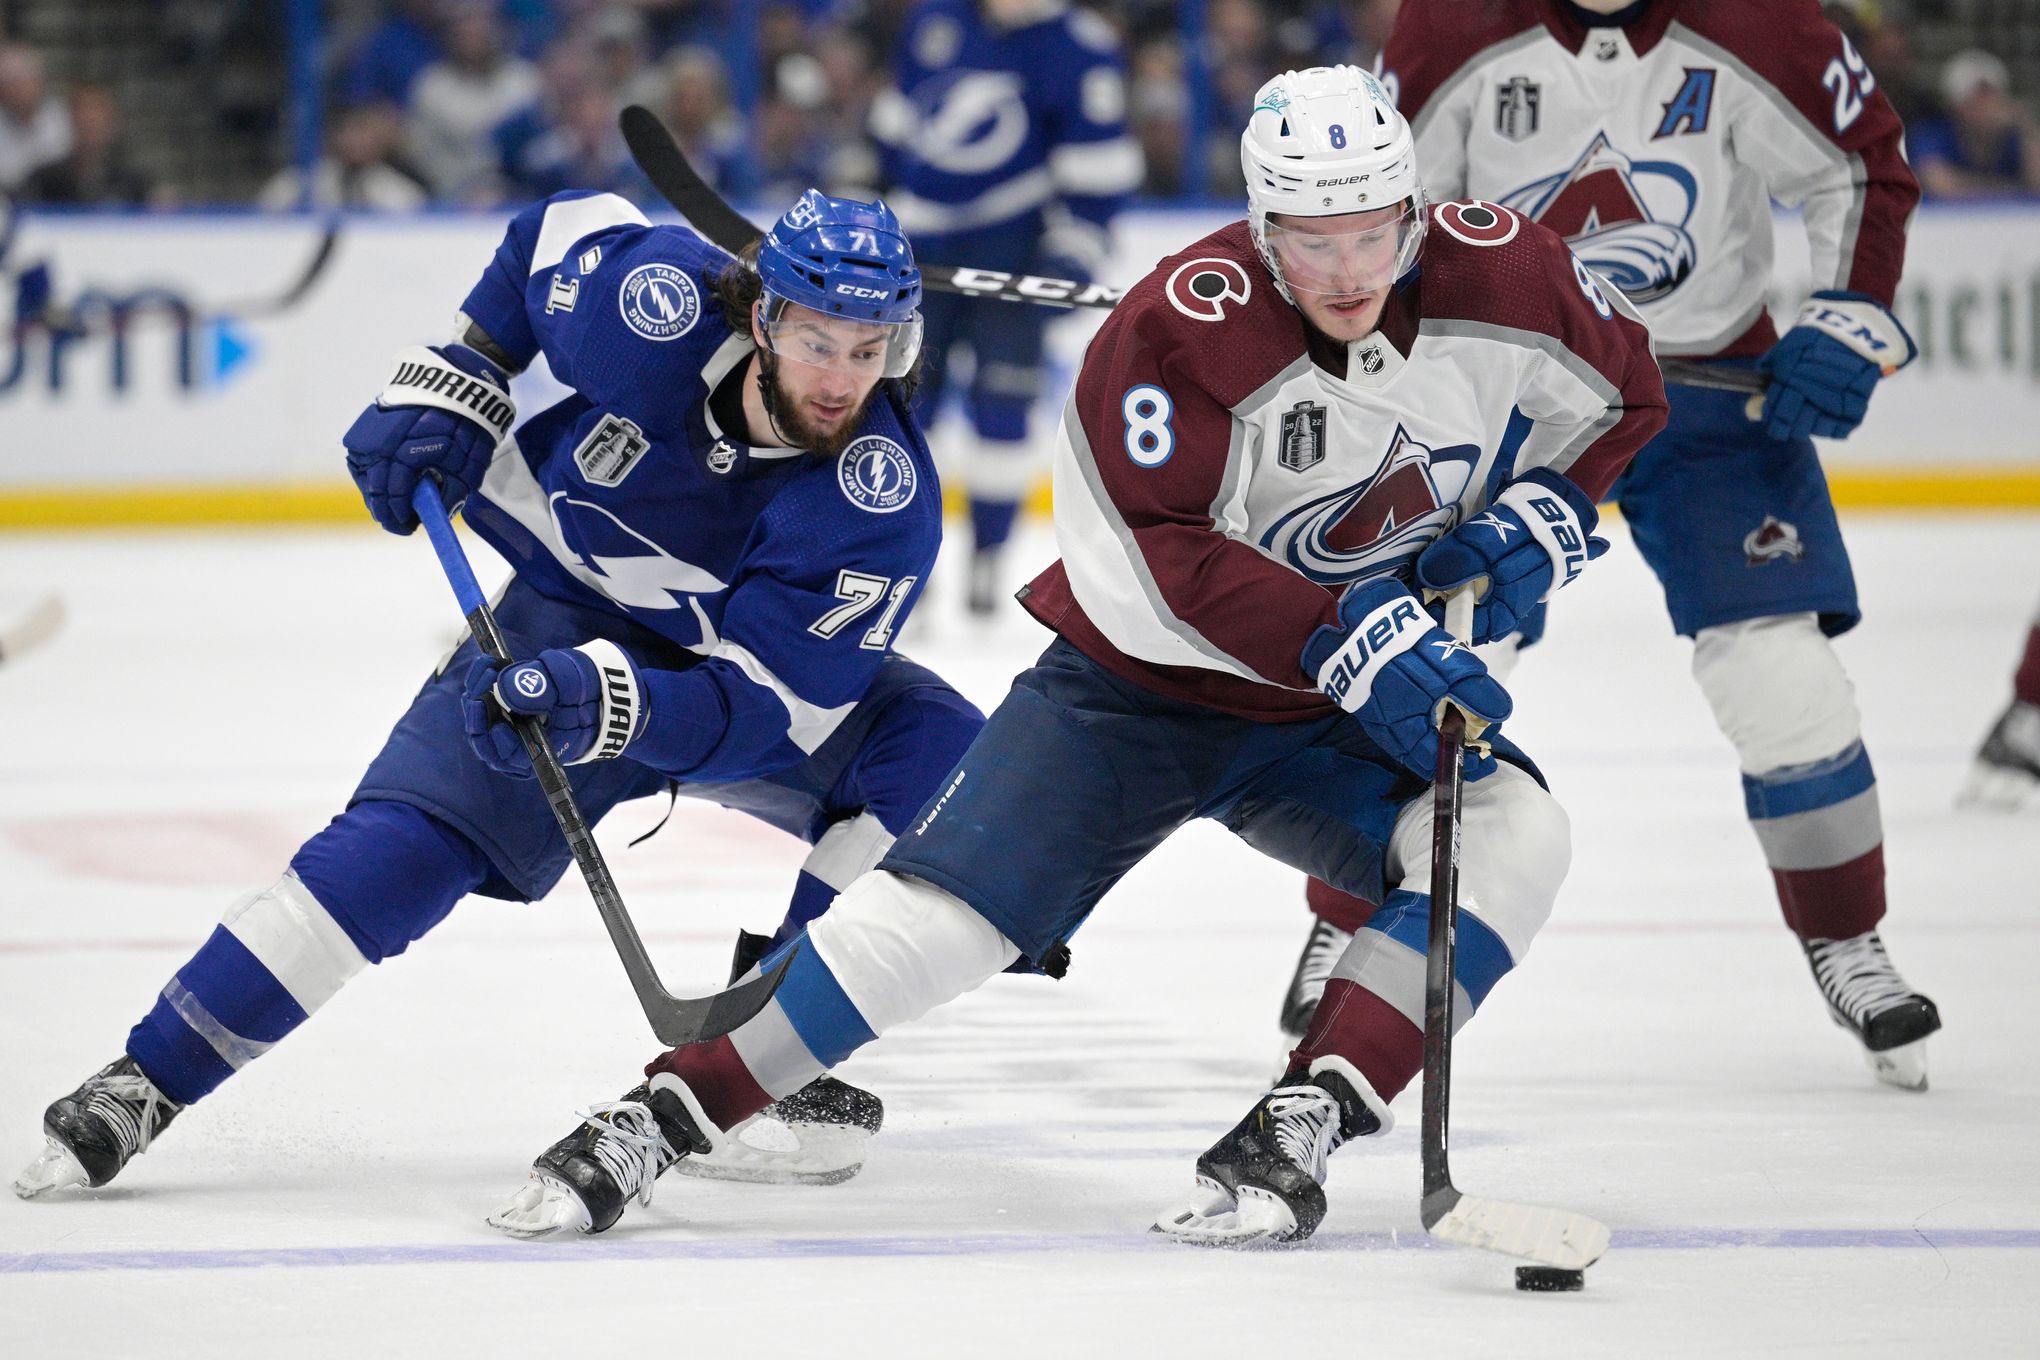 UMass hockey player Cale Makar set to make NHL debut with Avalanche in  Stanley Cup Playoffs